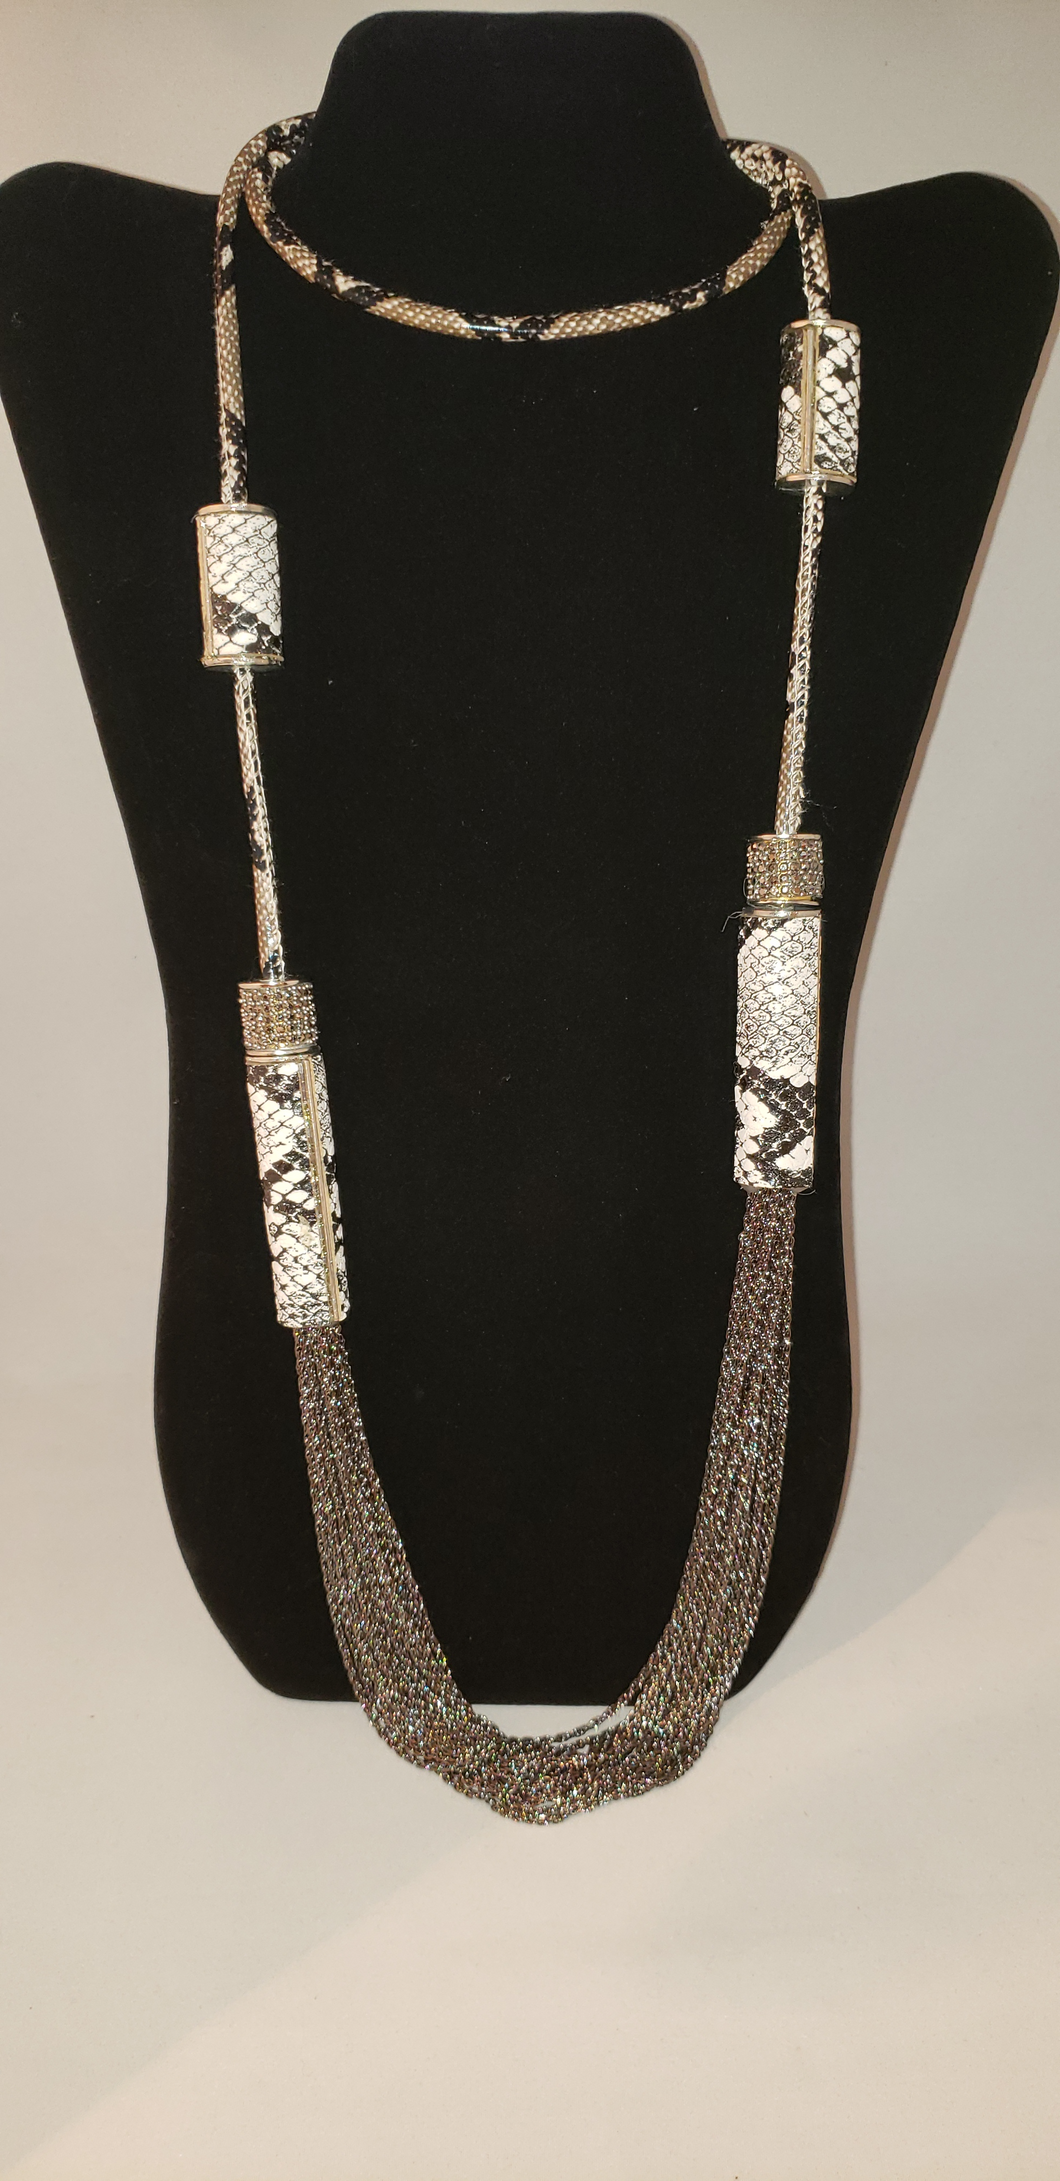 Faux Leather Snakeskin Print and Chain Necklace